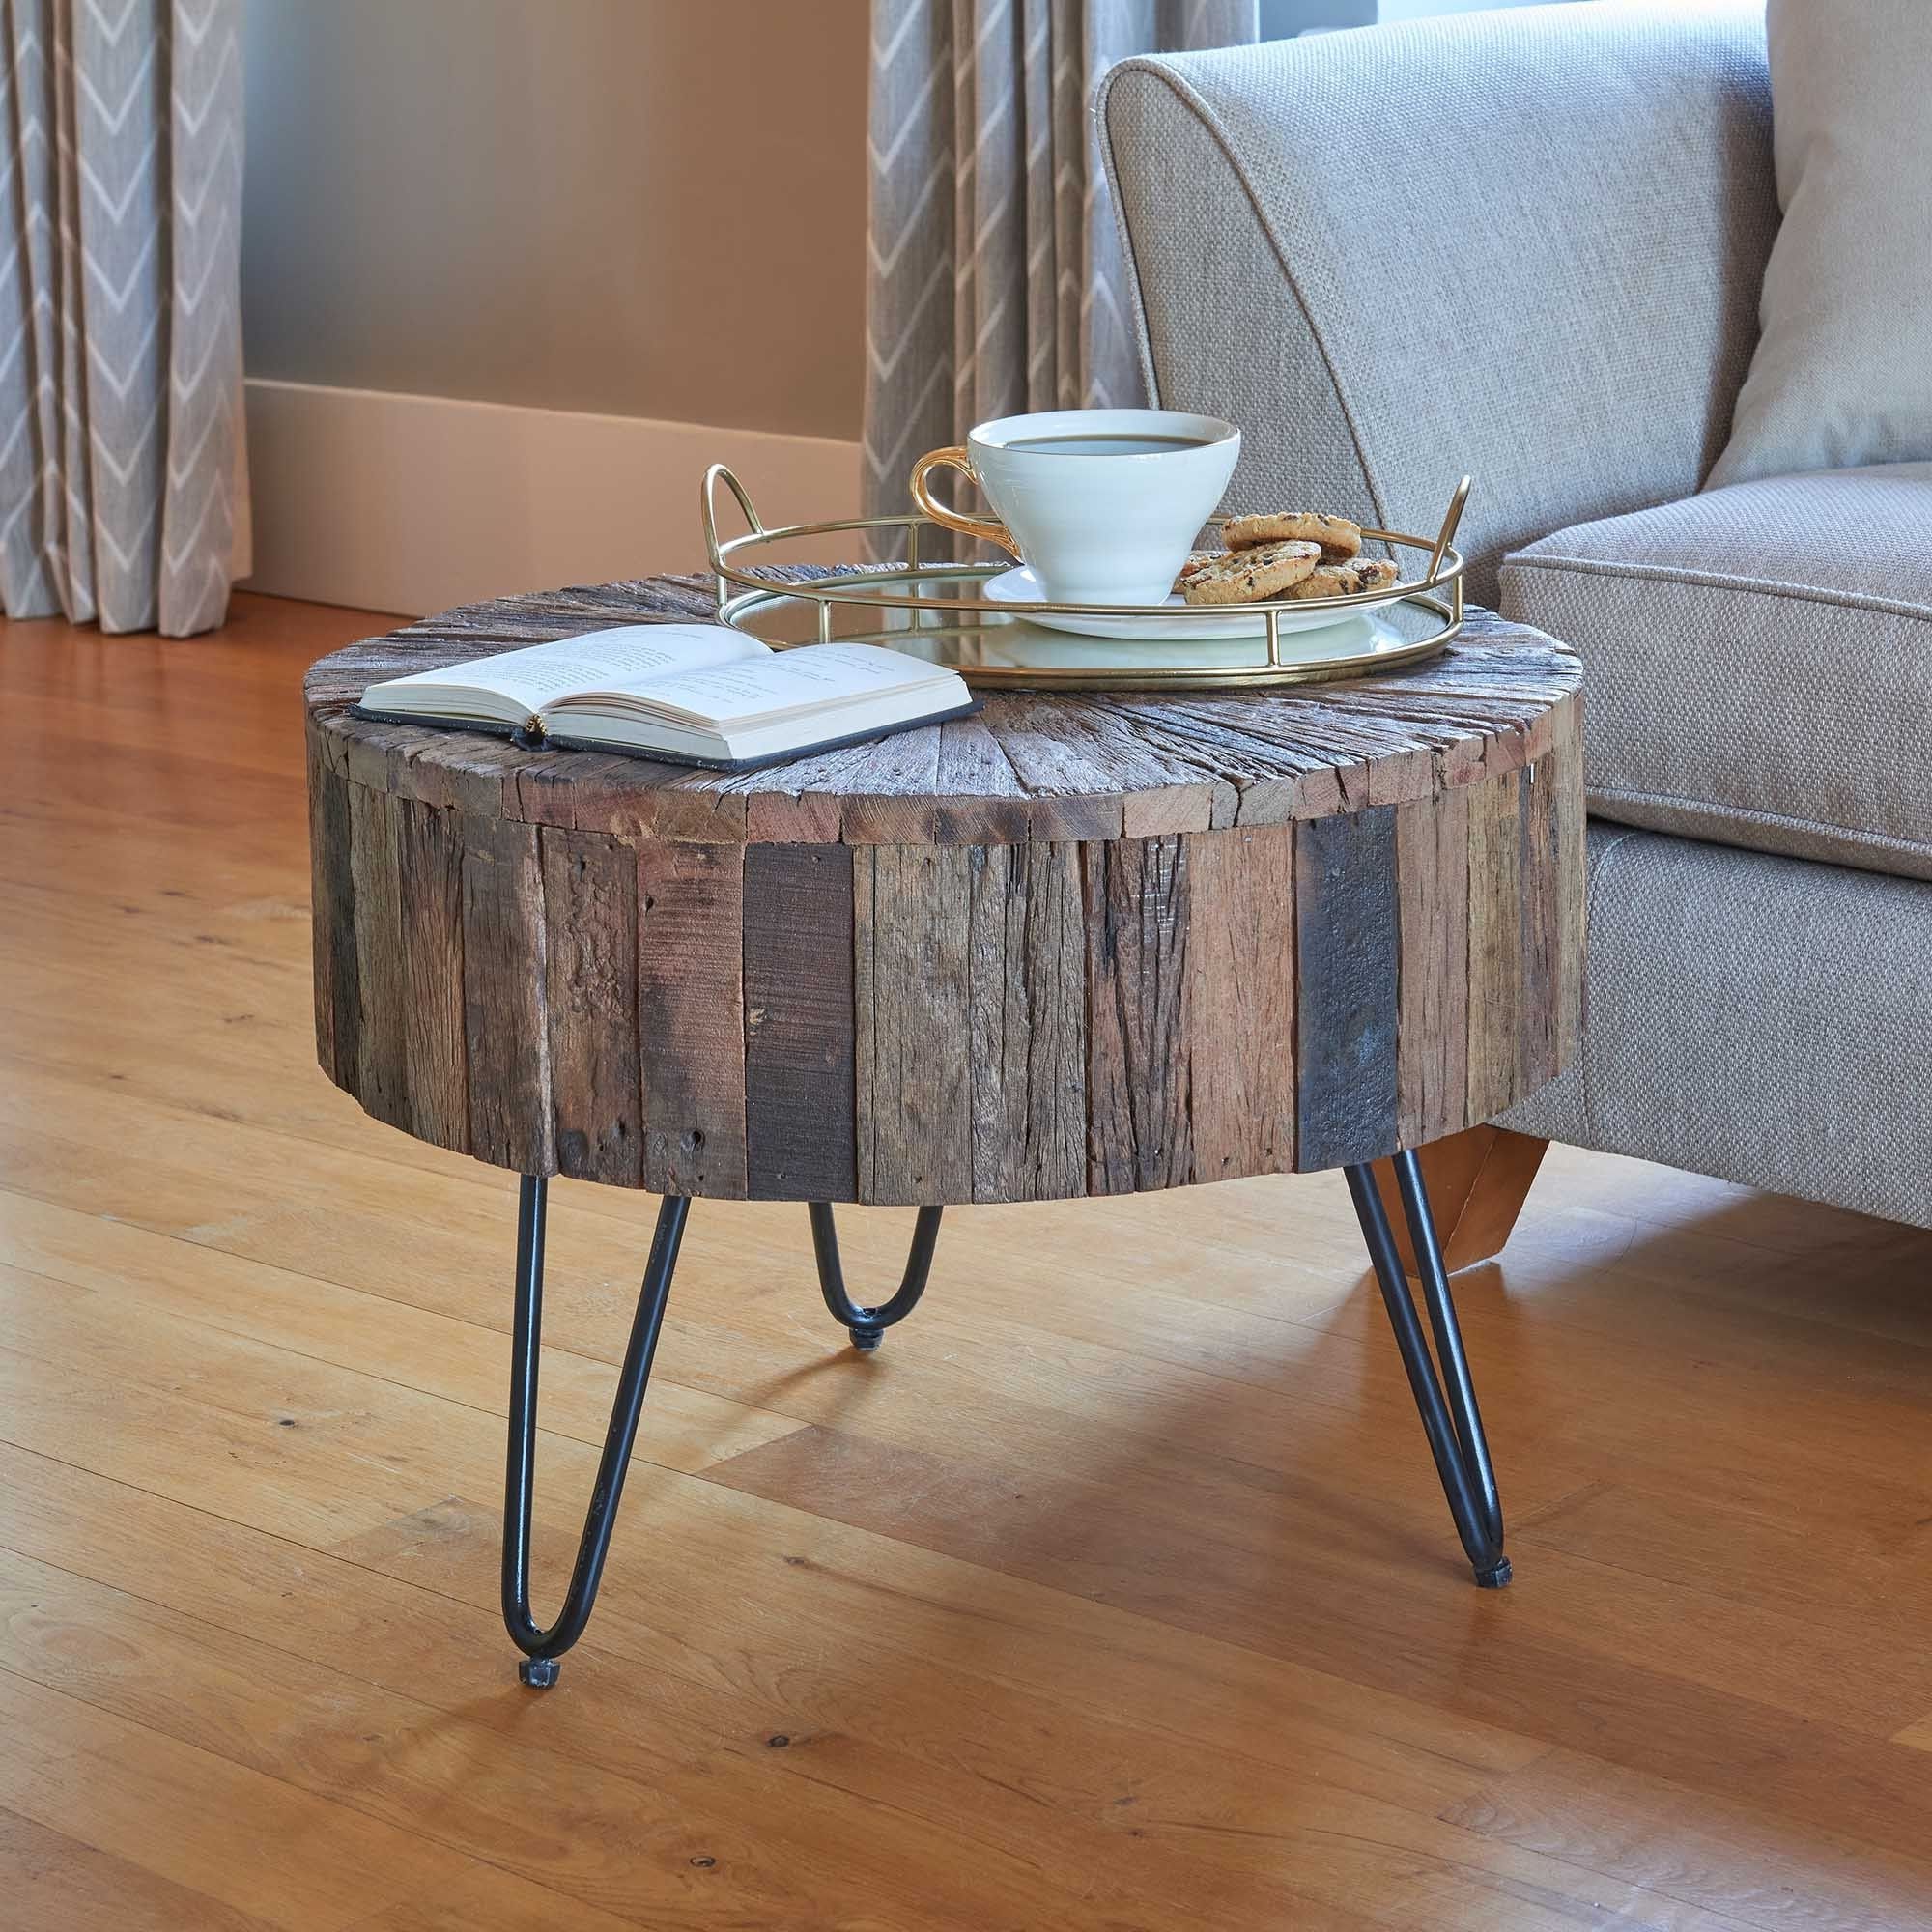 2019 Natural Mango Wood Coffee Tables Intended For Round Mango Wood Coffee Table (View 14 of 20)